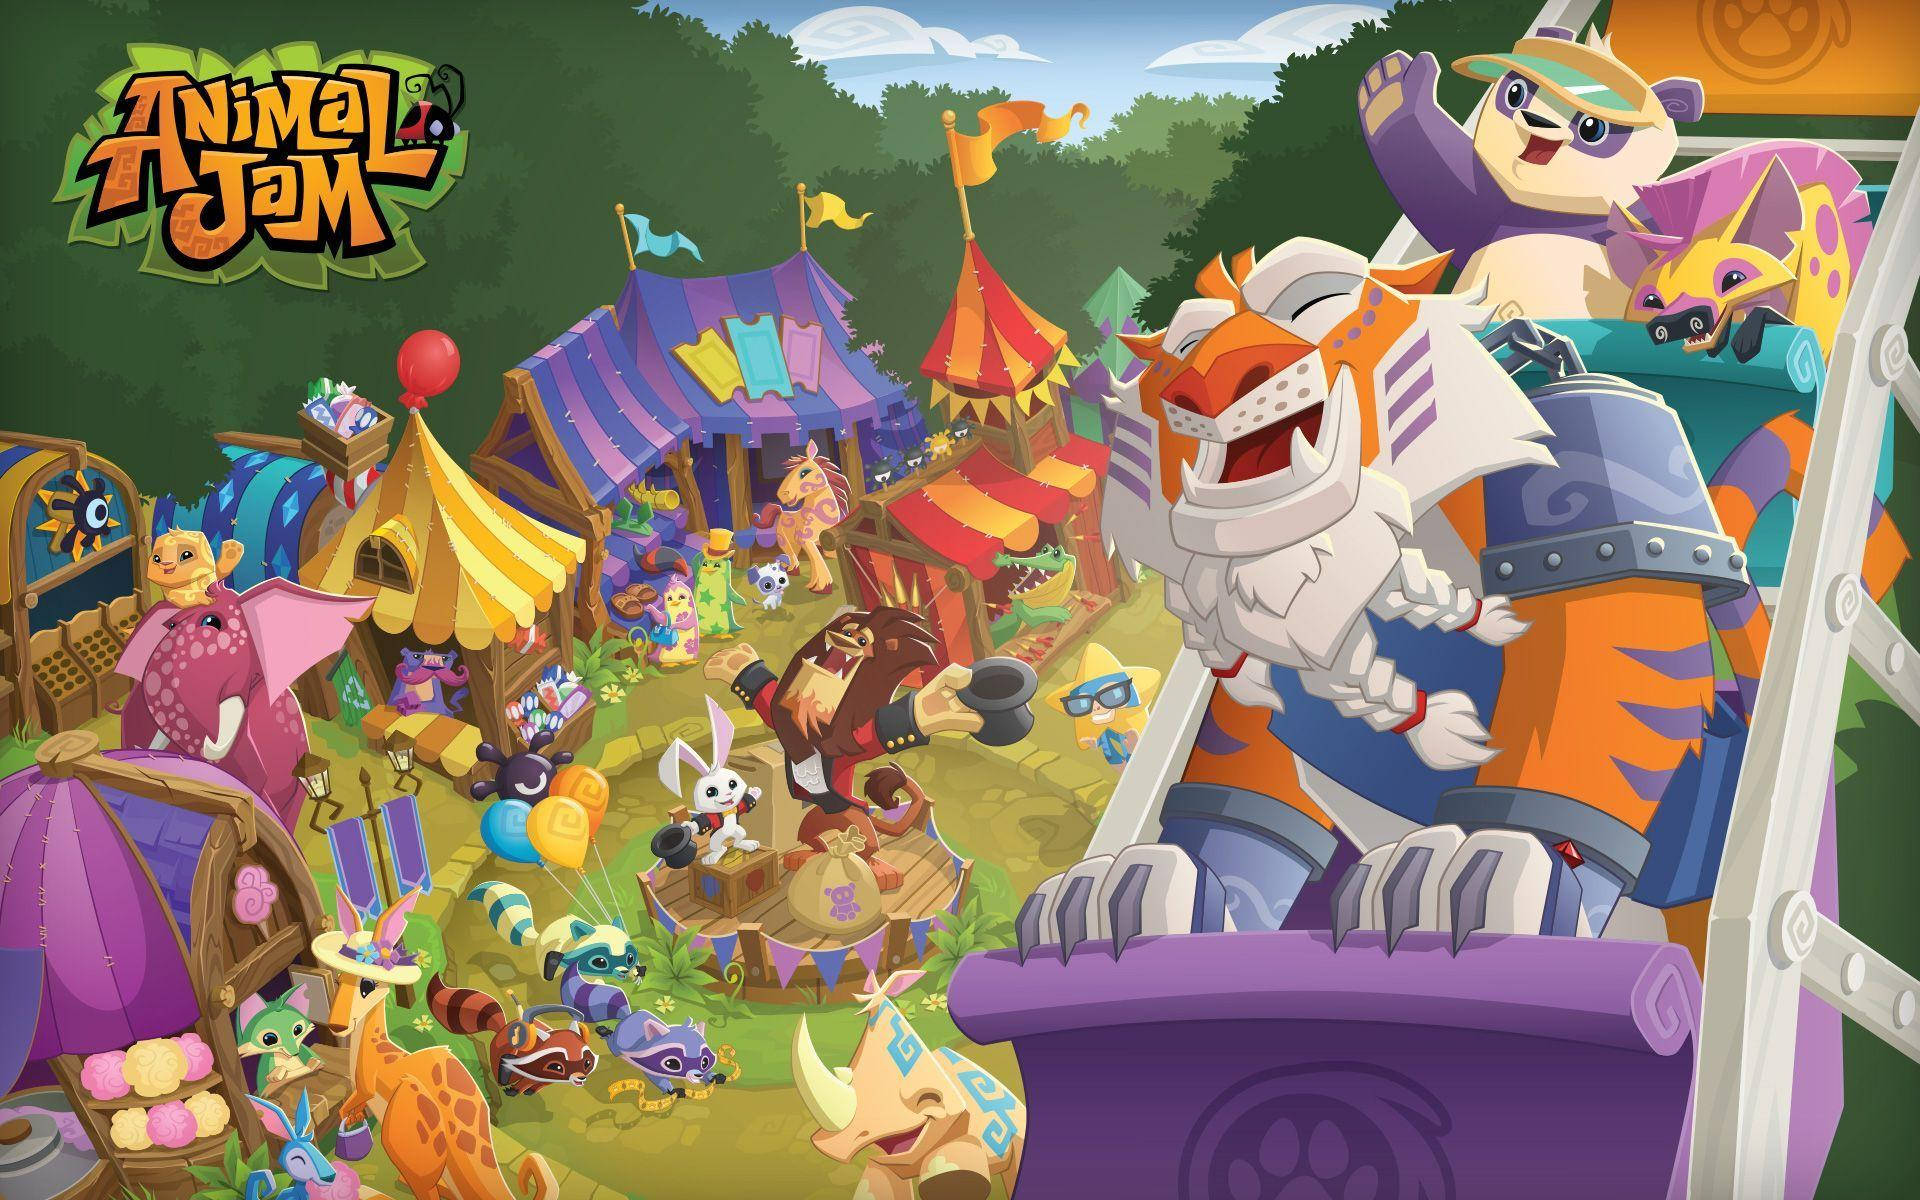 Animal Jam on Twitter We know many people are still stuck inside at home  so bring the spring season to your phone with this adorable Animal Jam  mobile wallpaper AnimalJam PlayWild KidsGames